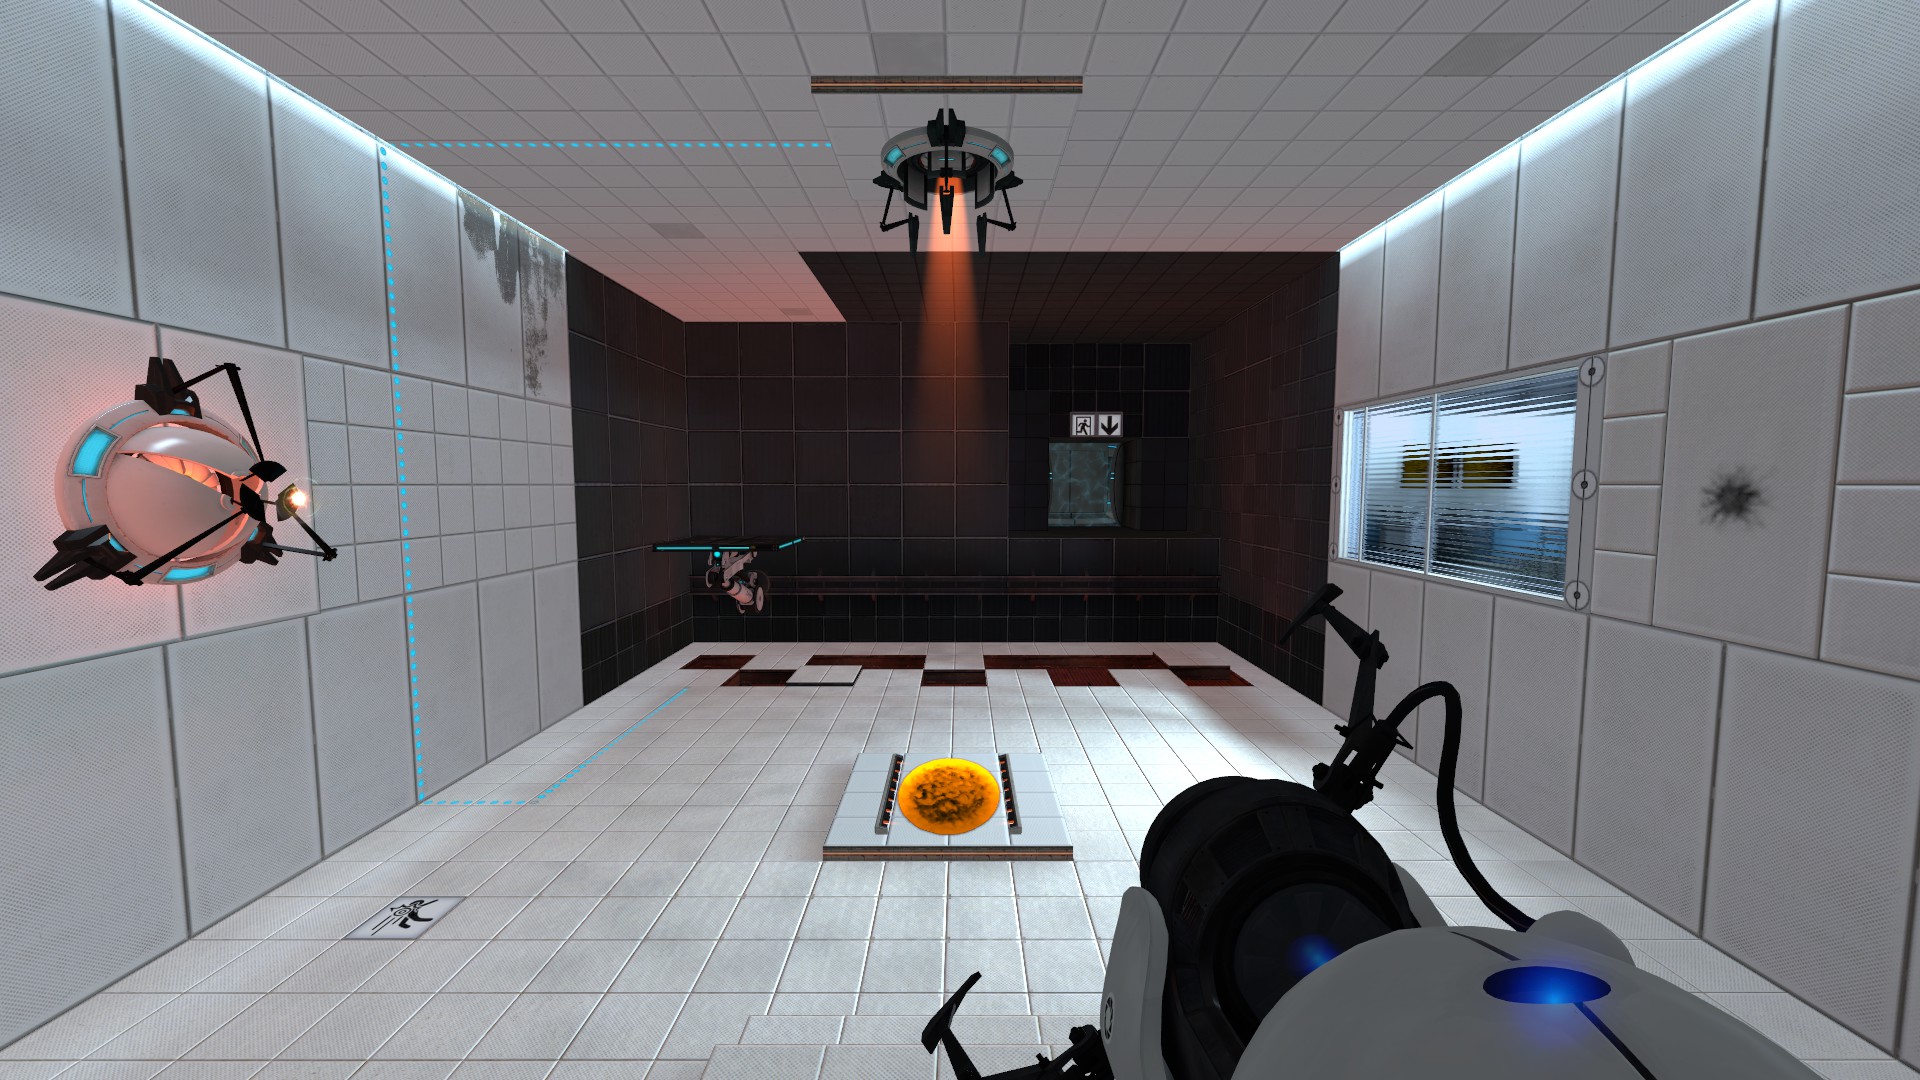 Image 4 - Portal Re-Ported: The First Slice mod for Portal 2.